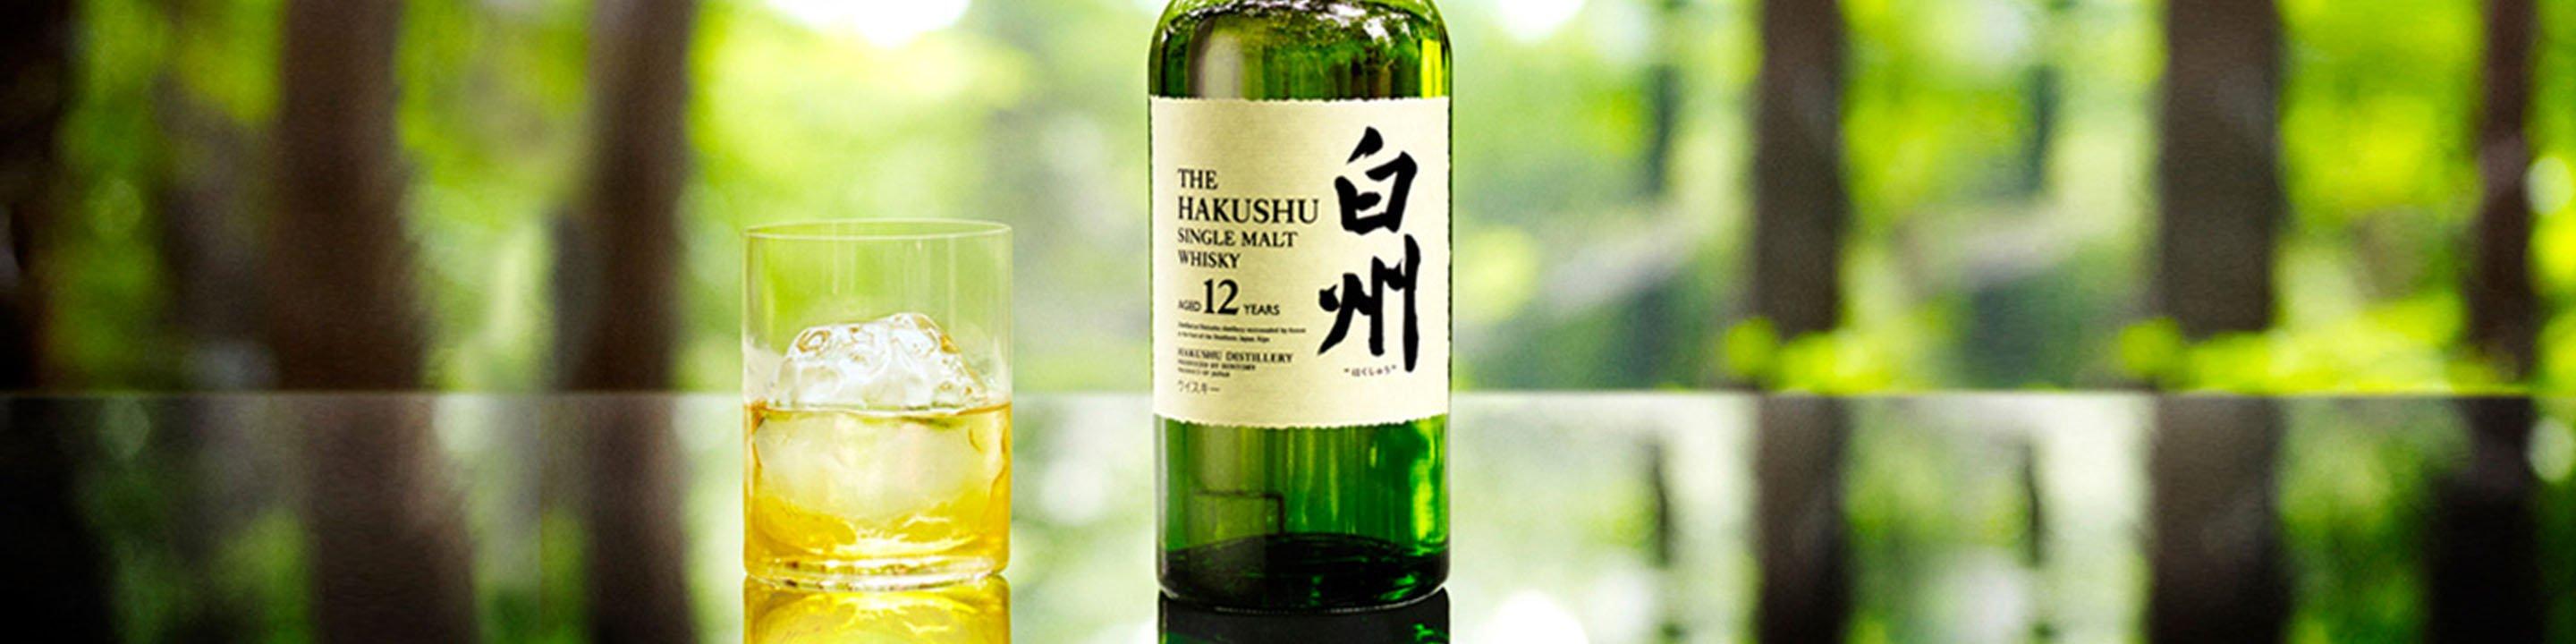 Straight from the untouched forests, mountains and pure waters of the Southern Japanese Alps, Hakushu's crisp and vibrant feel, unique in a single malt whisky, enlivens and liberates your senses. Savor this whisky neat, on the rocks, or blended with water.

Buy Hakushu online now from nearby liquor stores via Minibar Delivery.